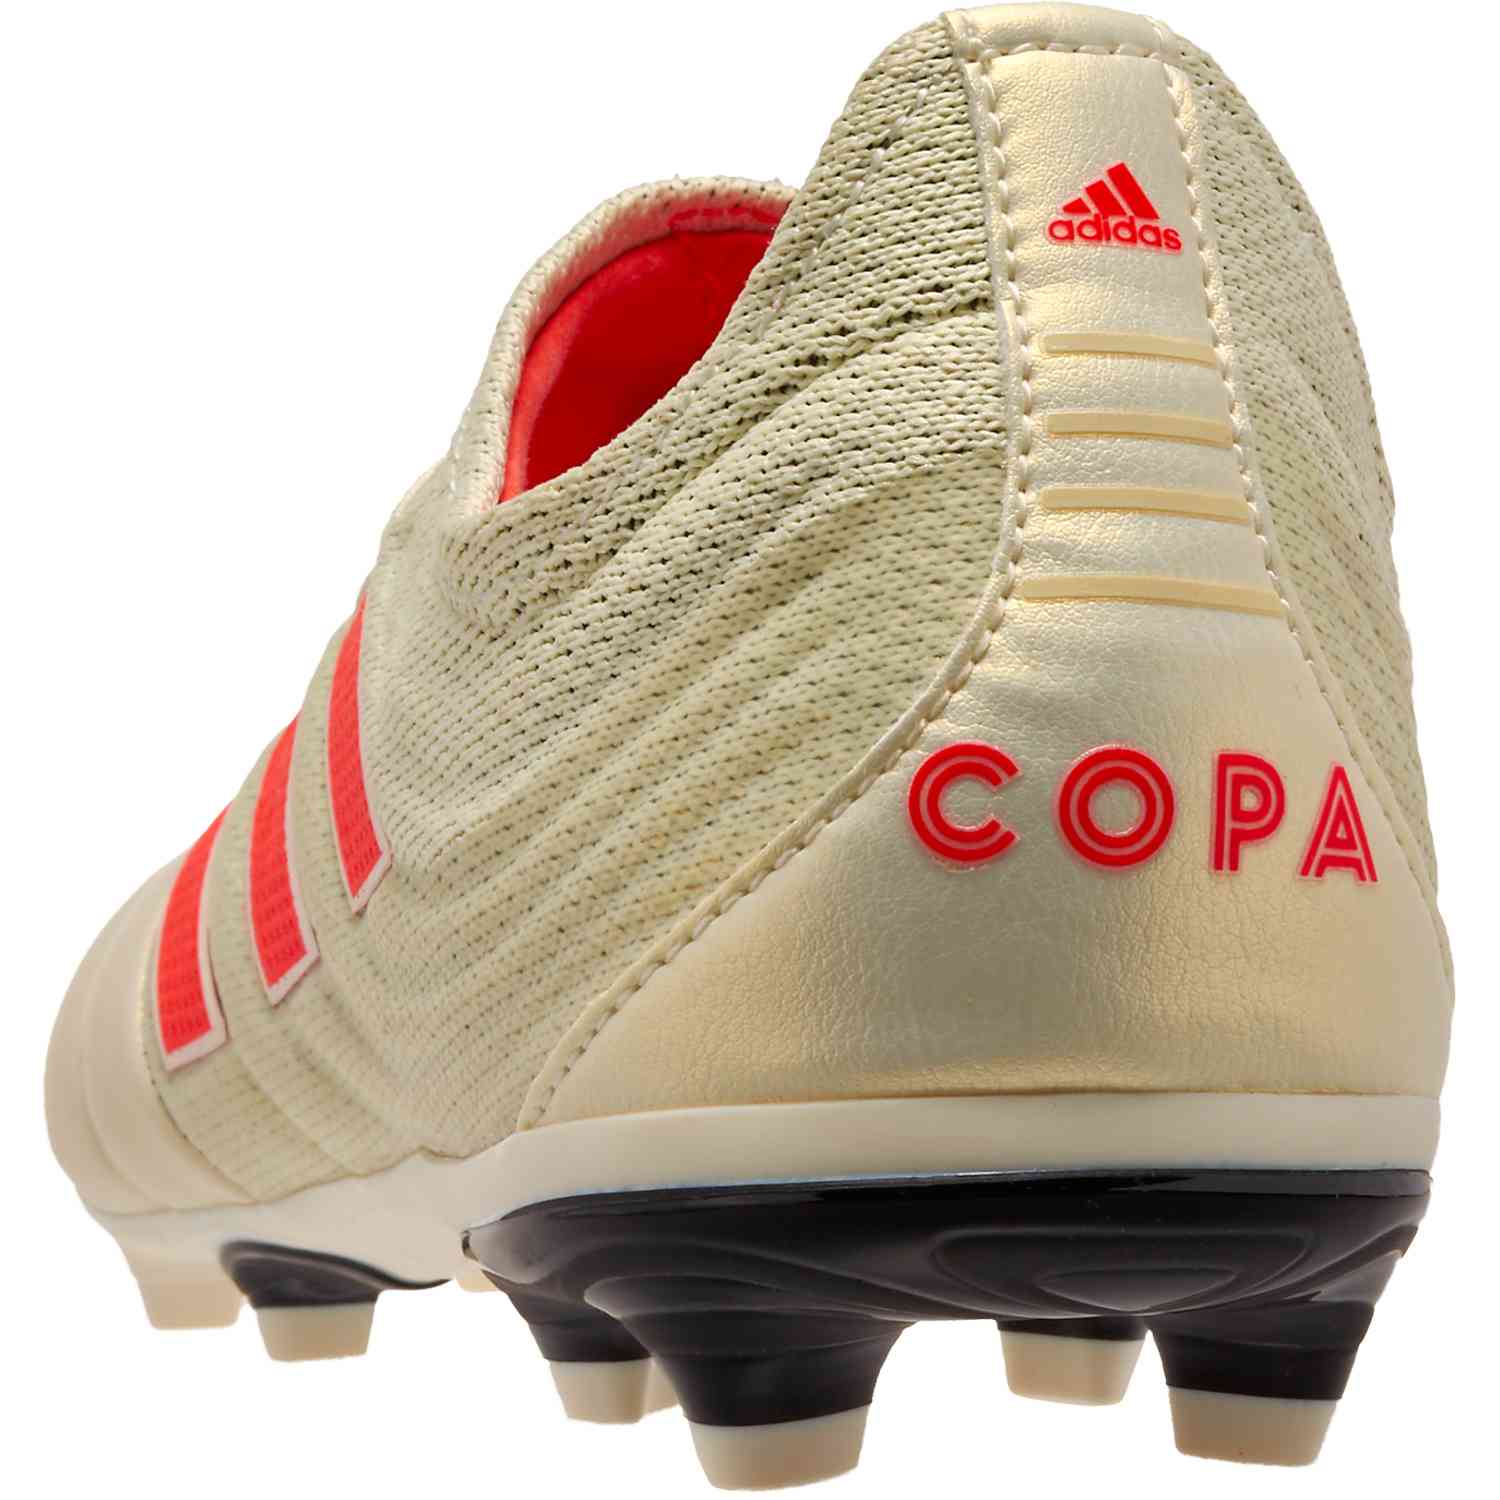 adidas copa youth soccer cleats